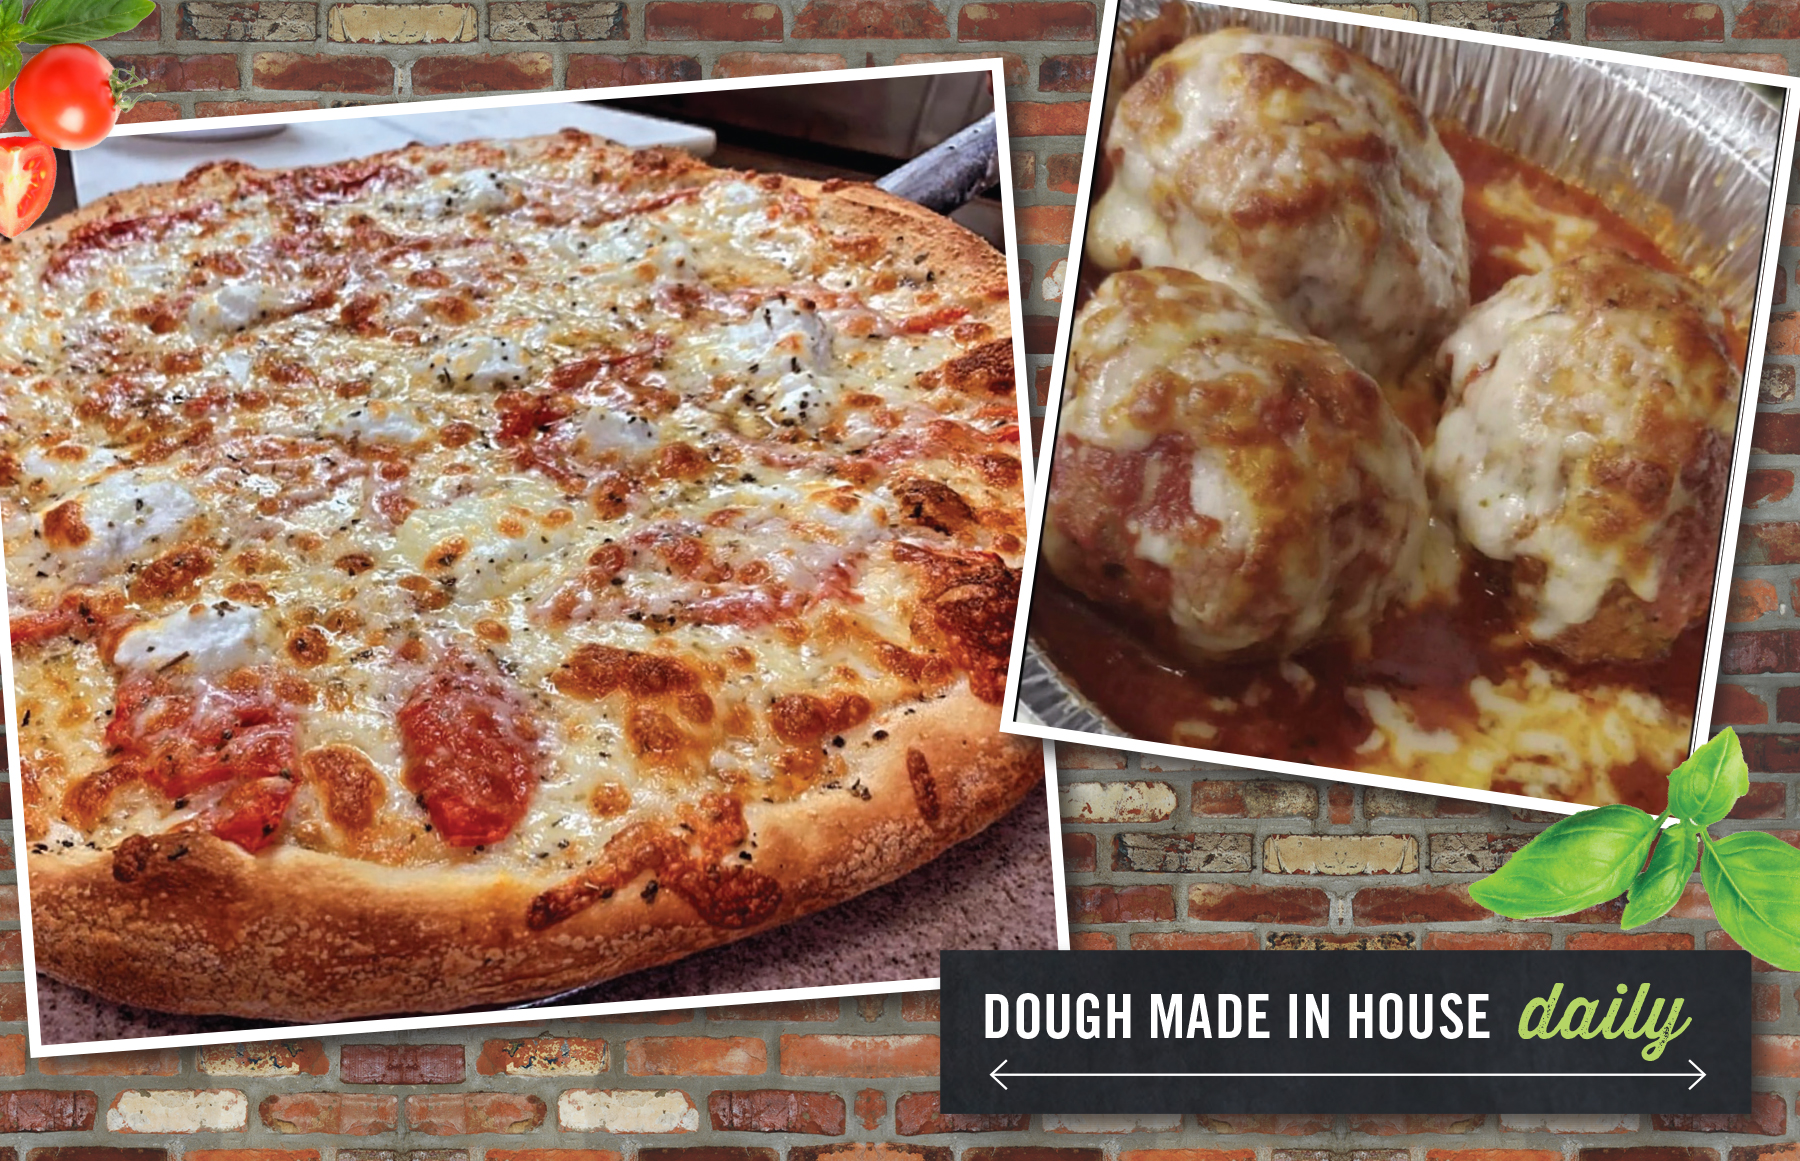 Dough made in house daily